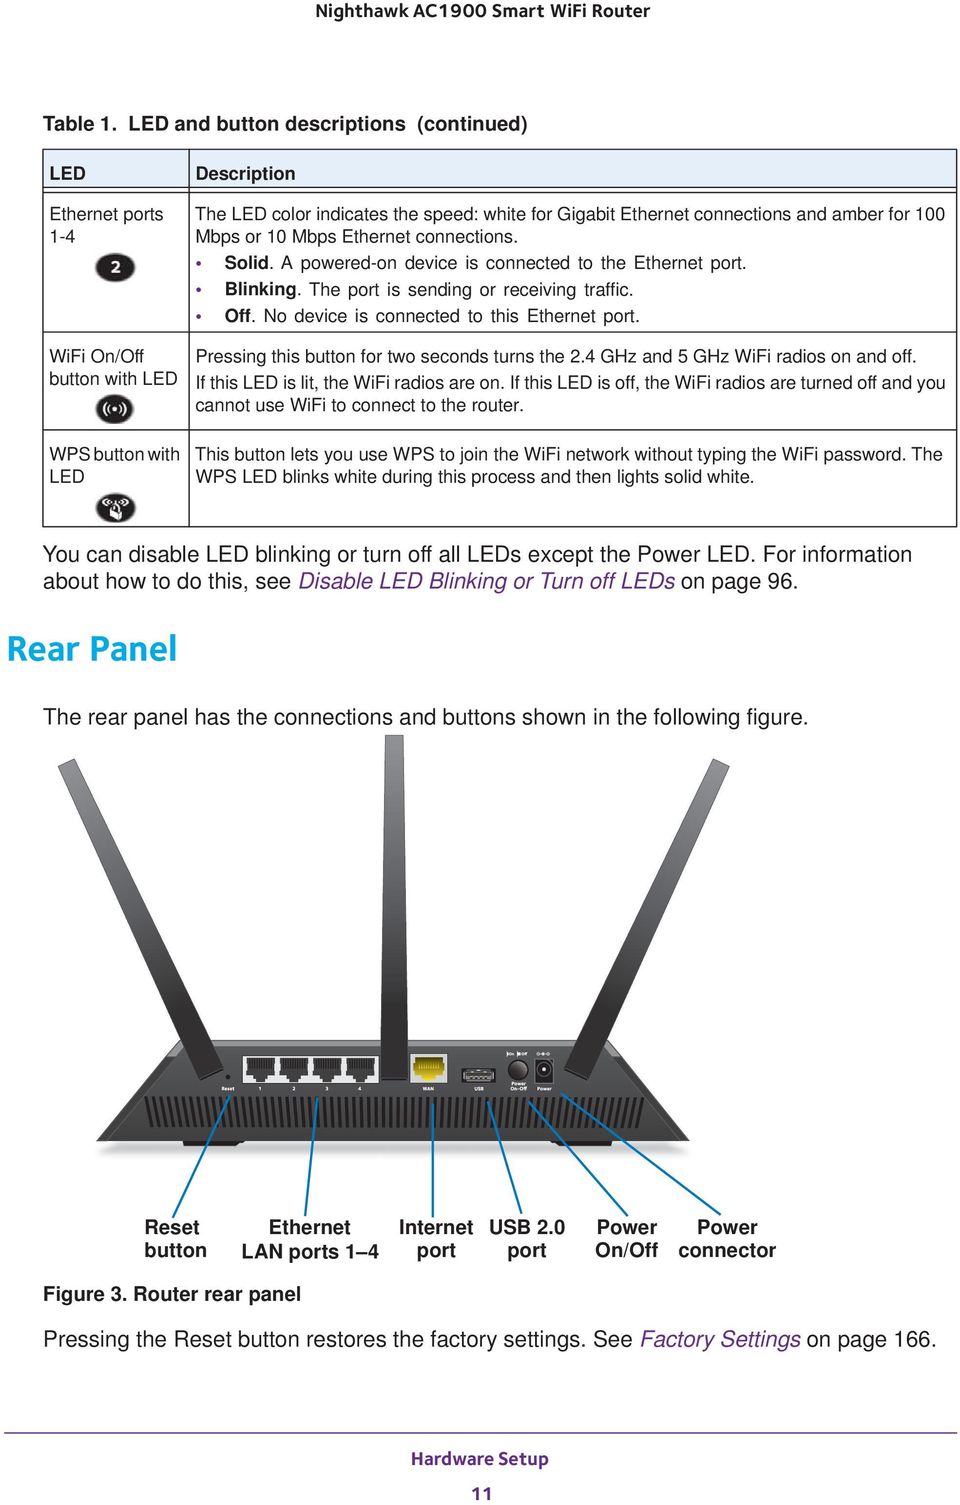 and amber for 100 Mbps or 10 Mbps Ethernet connections. Solid. A powered-on device is connected to the Ethernet port. Blinking. The port is sending or receiving traffic. Off.